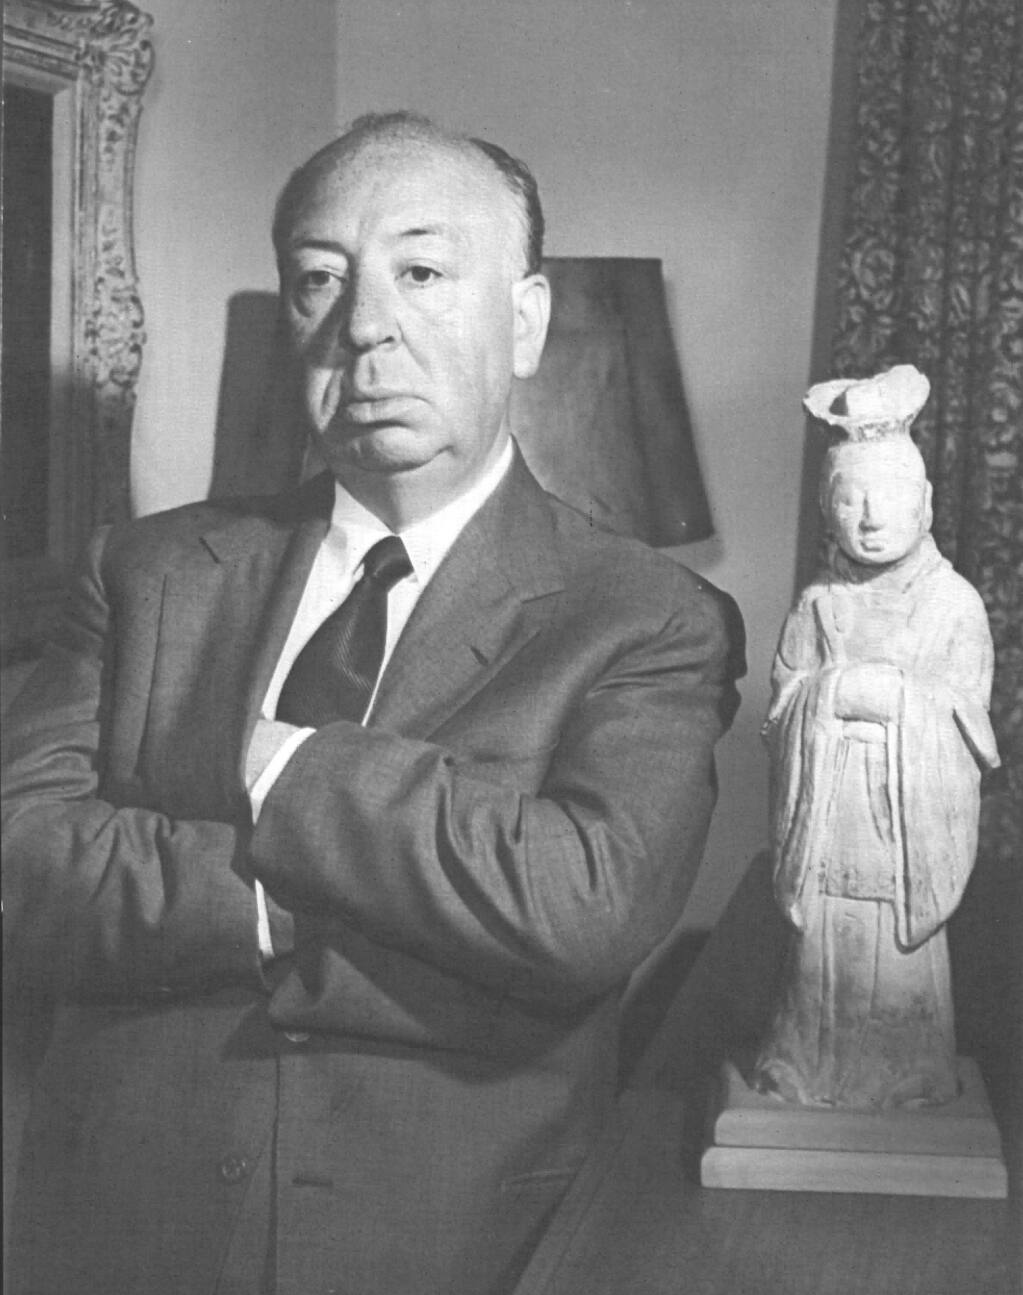 A portrait of famed film director Alfred Hitchcock (1899-1980) in Hollywood in 1977. Hitchcock directed over 50 movies throughout his career, including two filmed in Sonoma County — “The Birds” in 1963 and “Shadow of a Doubt” in 1943. (UPI)